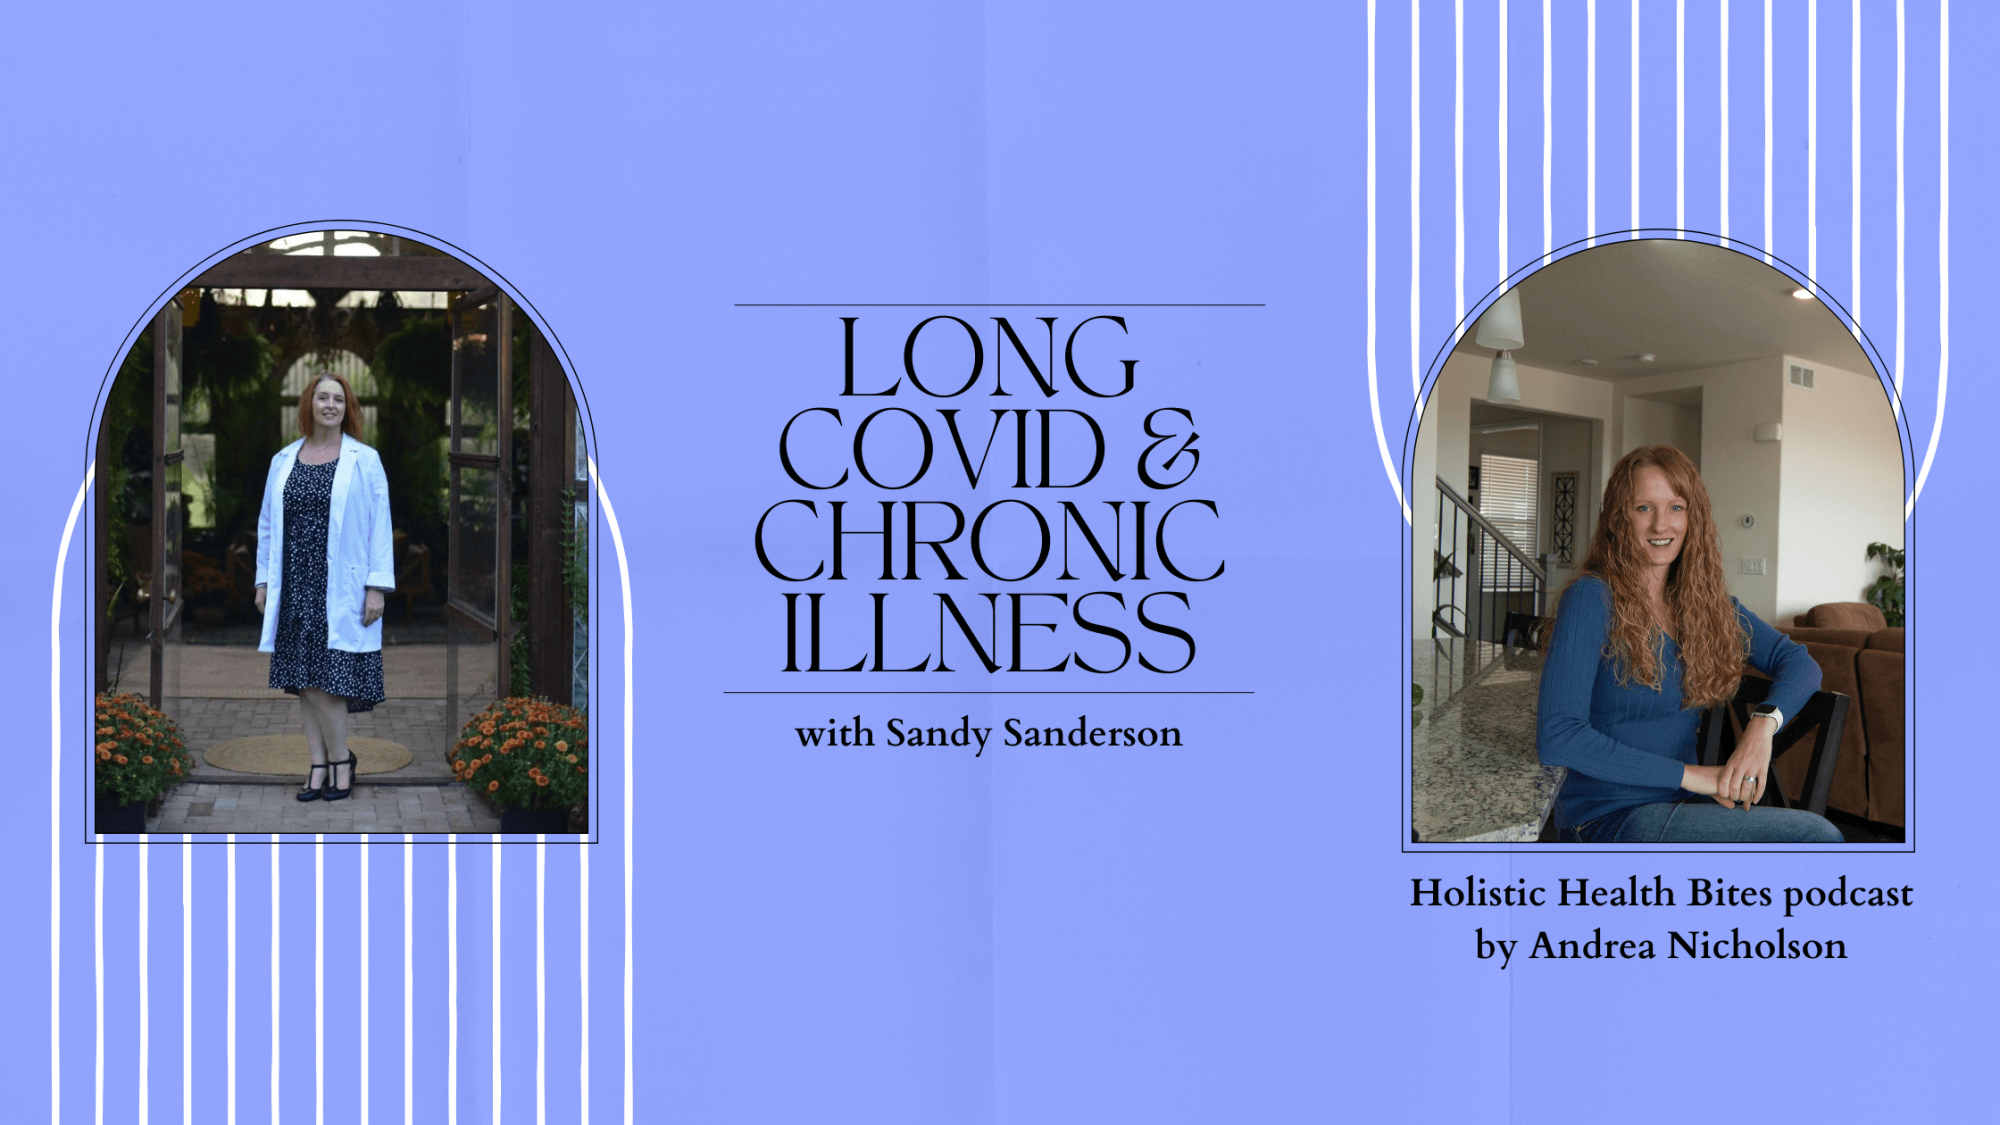 Long COVID and Chronic Illness with Sandy Sanderson, interview by Functional Nutritionist Andrea Nicholson